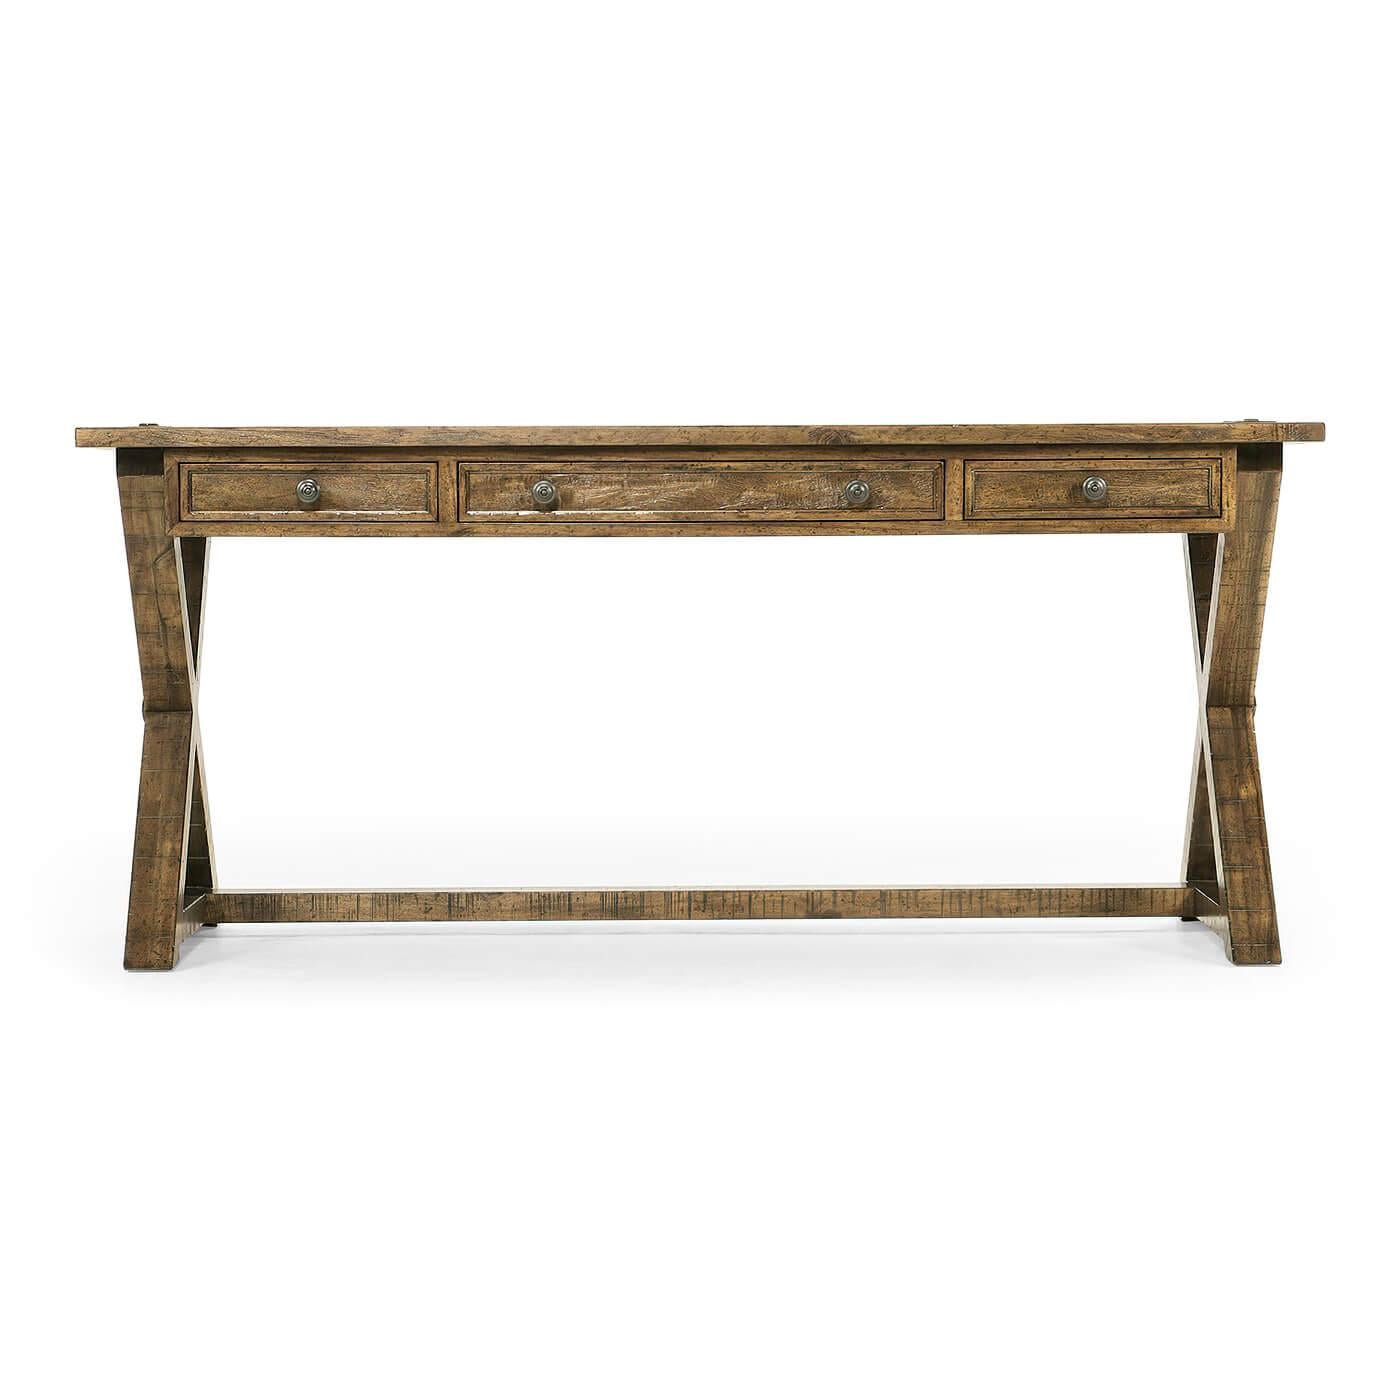 A rustic country-style solid light driftwood finished rectangular desk with a rustic finish revealing exposed saw marks. Three small oak-lined drawers to front with mortice and tenon joints to X-frame support and top surface.

Dimensions: 68